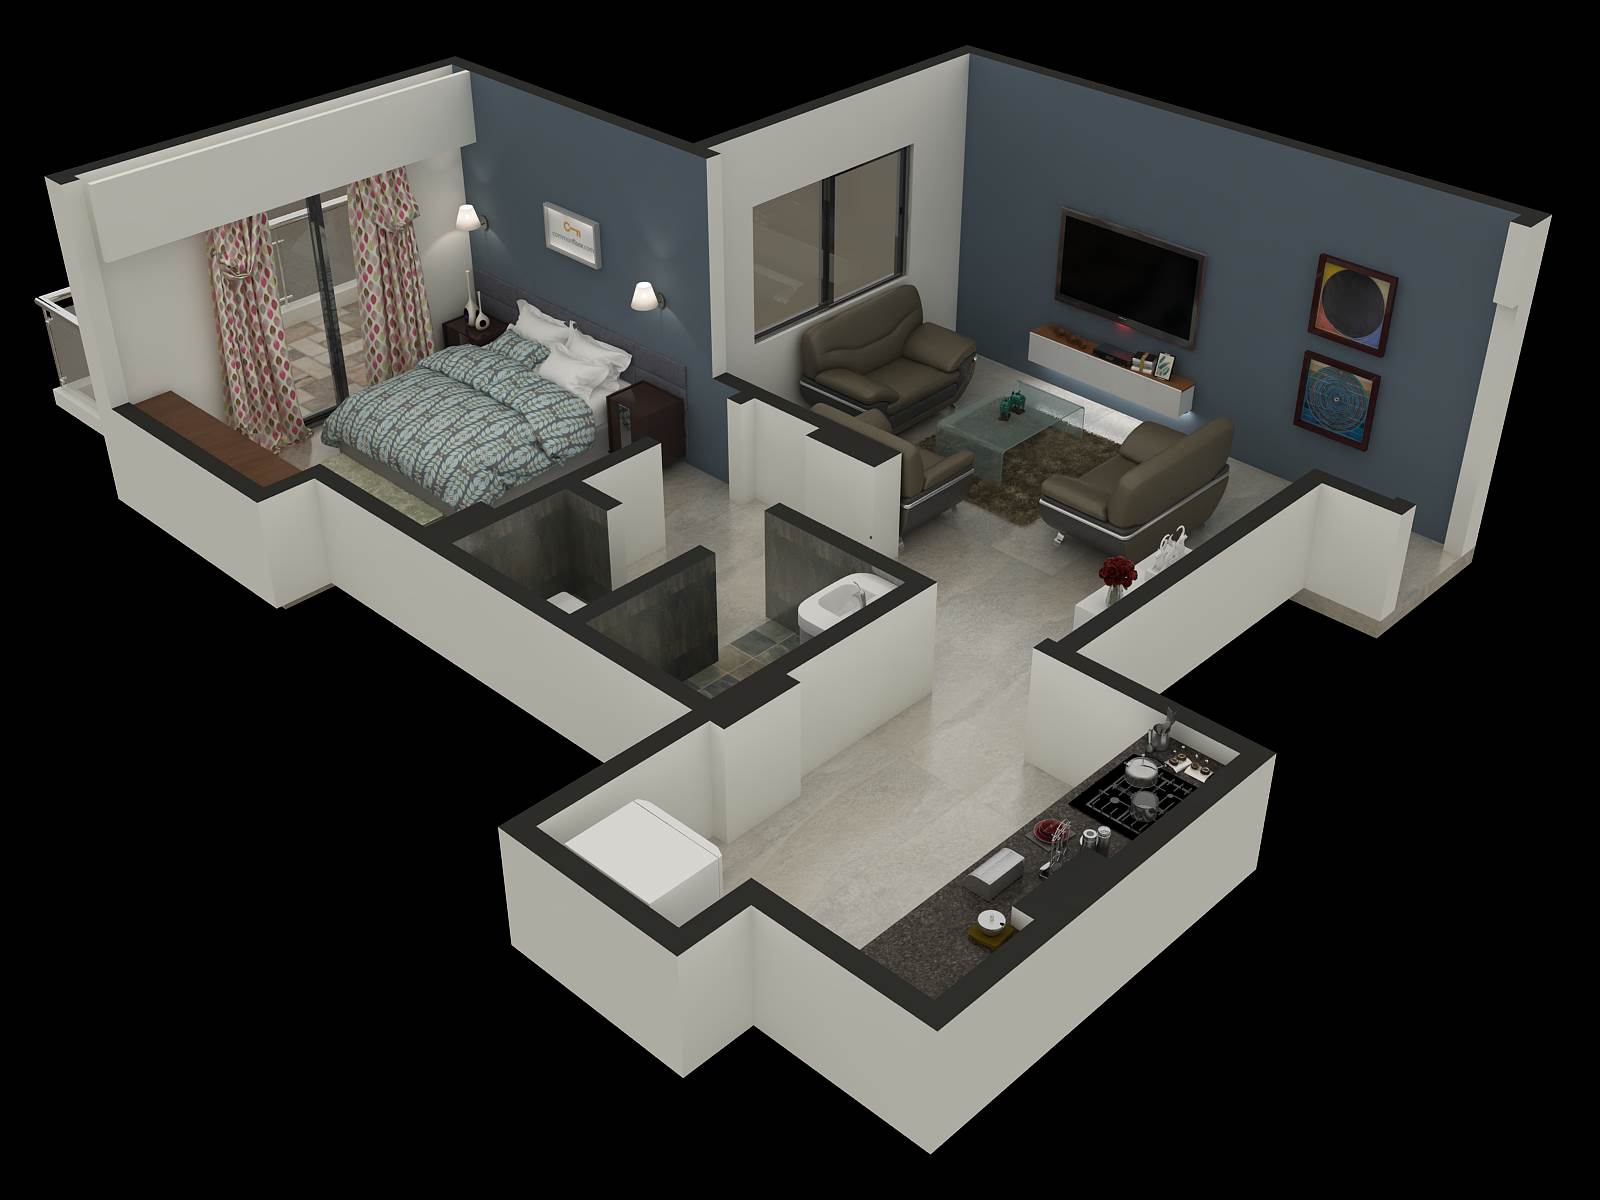 3D Floor Plan Design http://www.rayvatengineering.com/3d-floor-plan/ - 3D Floor Plans Design  would be able to convince the clients and show them the time/benefit ratio by Rayvatengineering